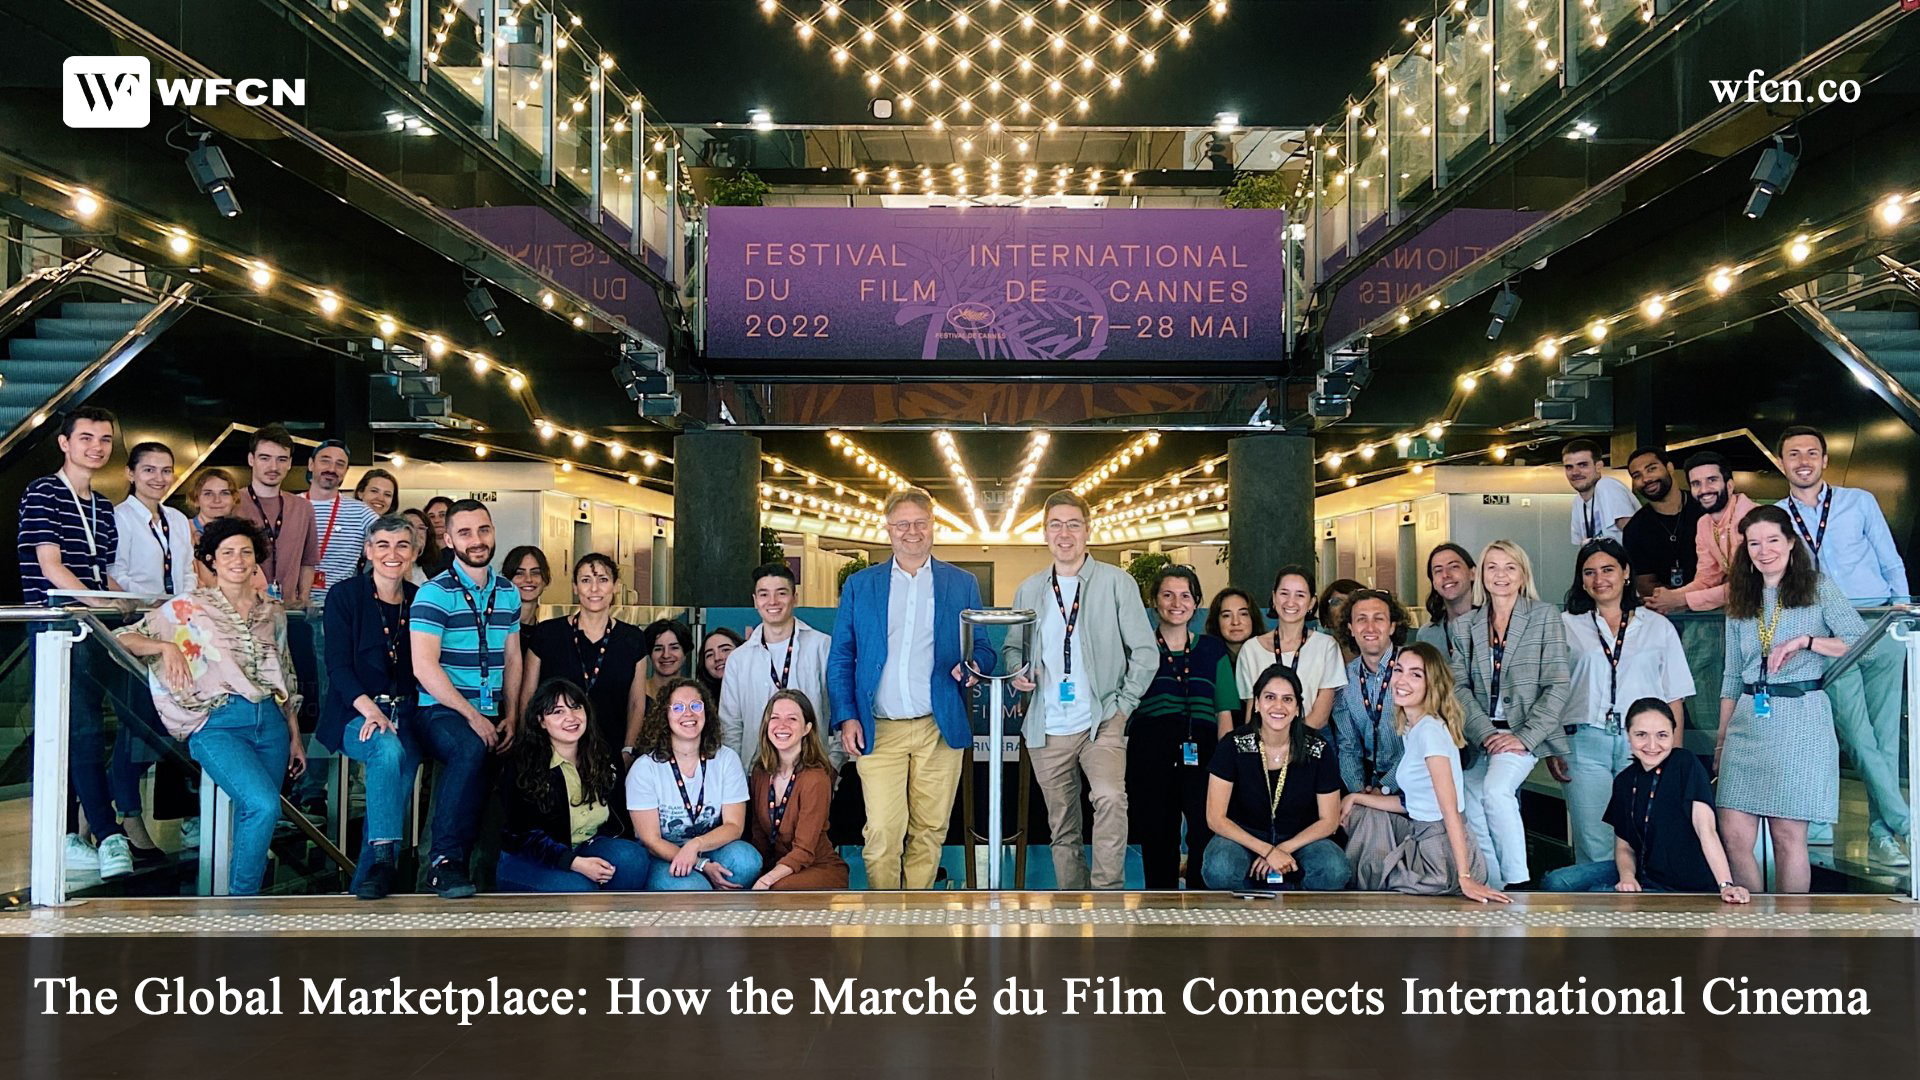 The Global Marketplace: How the Marché du Film Connects International Cinema